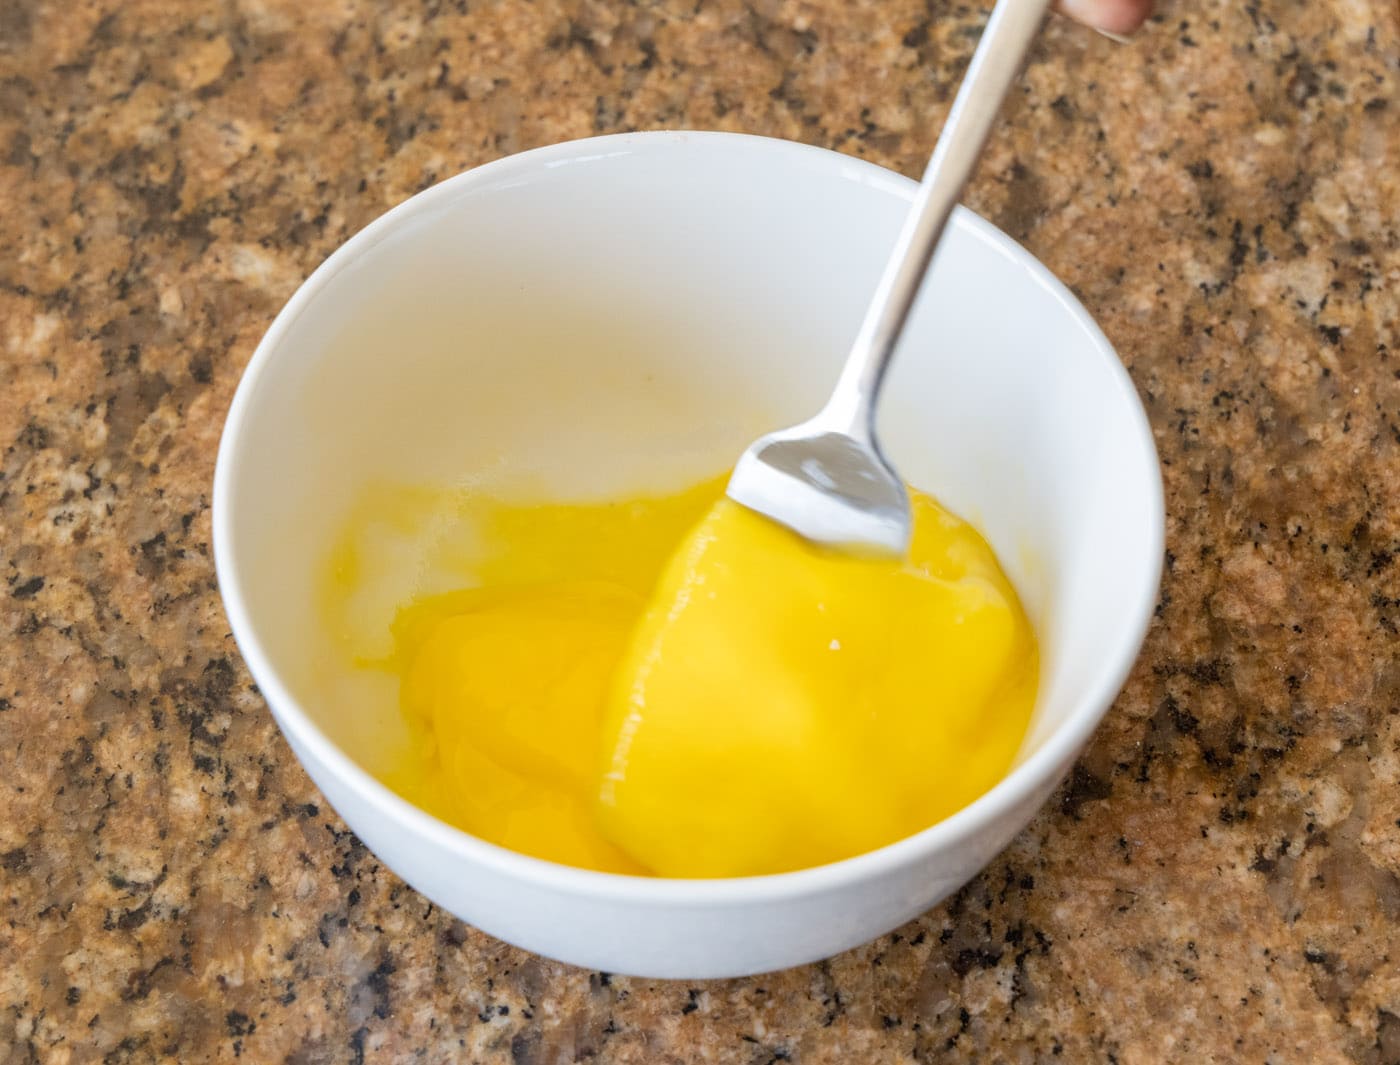 whisking eggs in a bowl with a fork